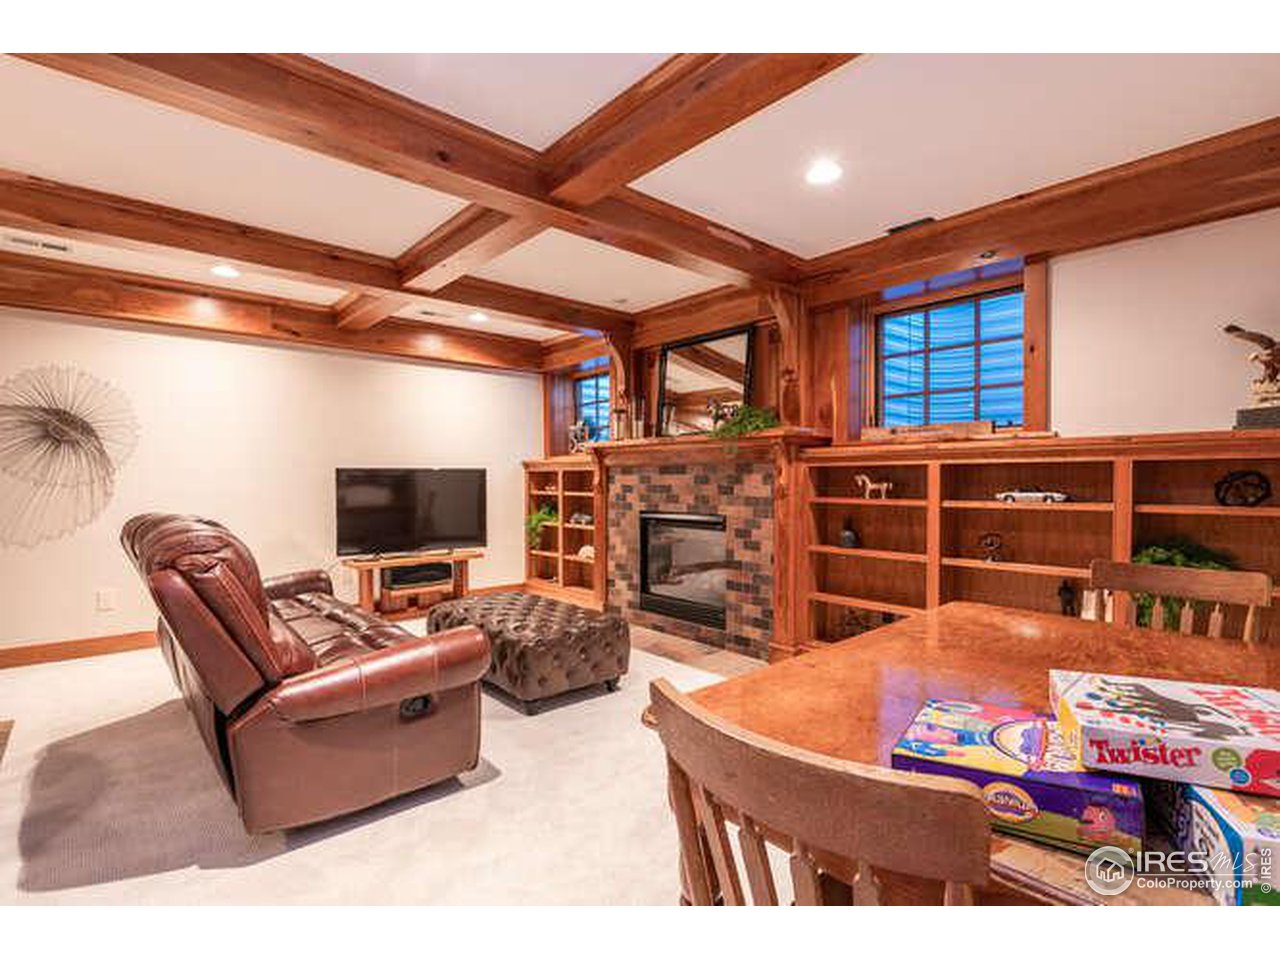 Great room, gas fireplace, built in bookshelves. 